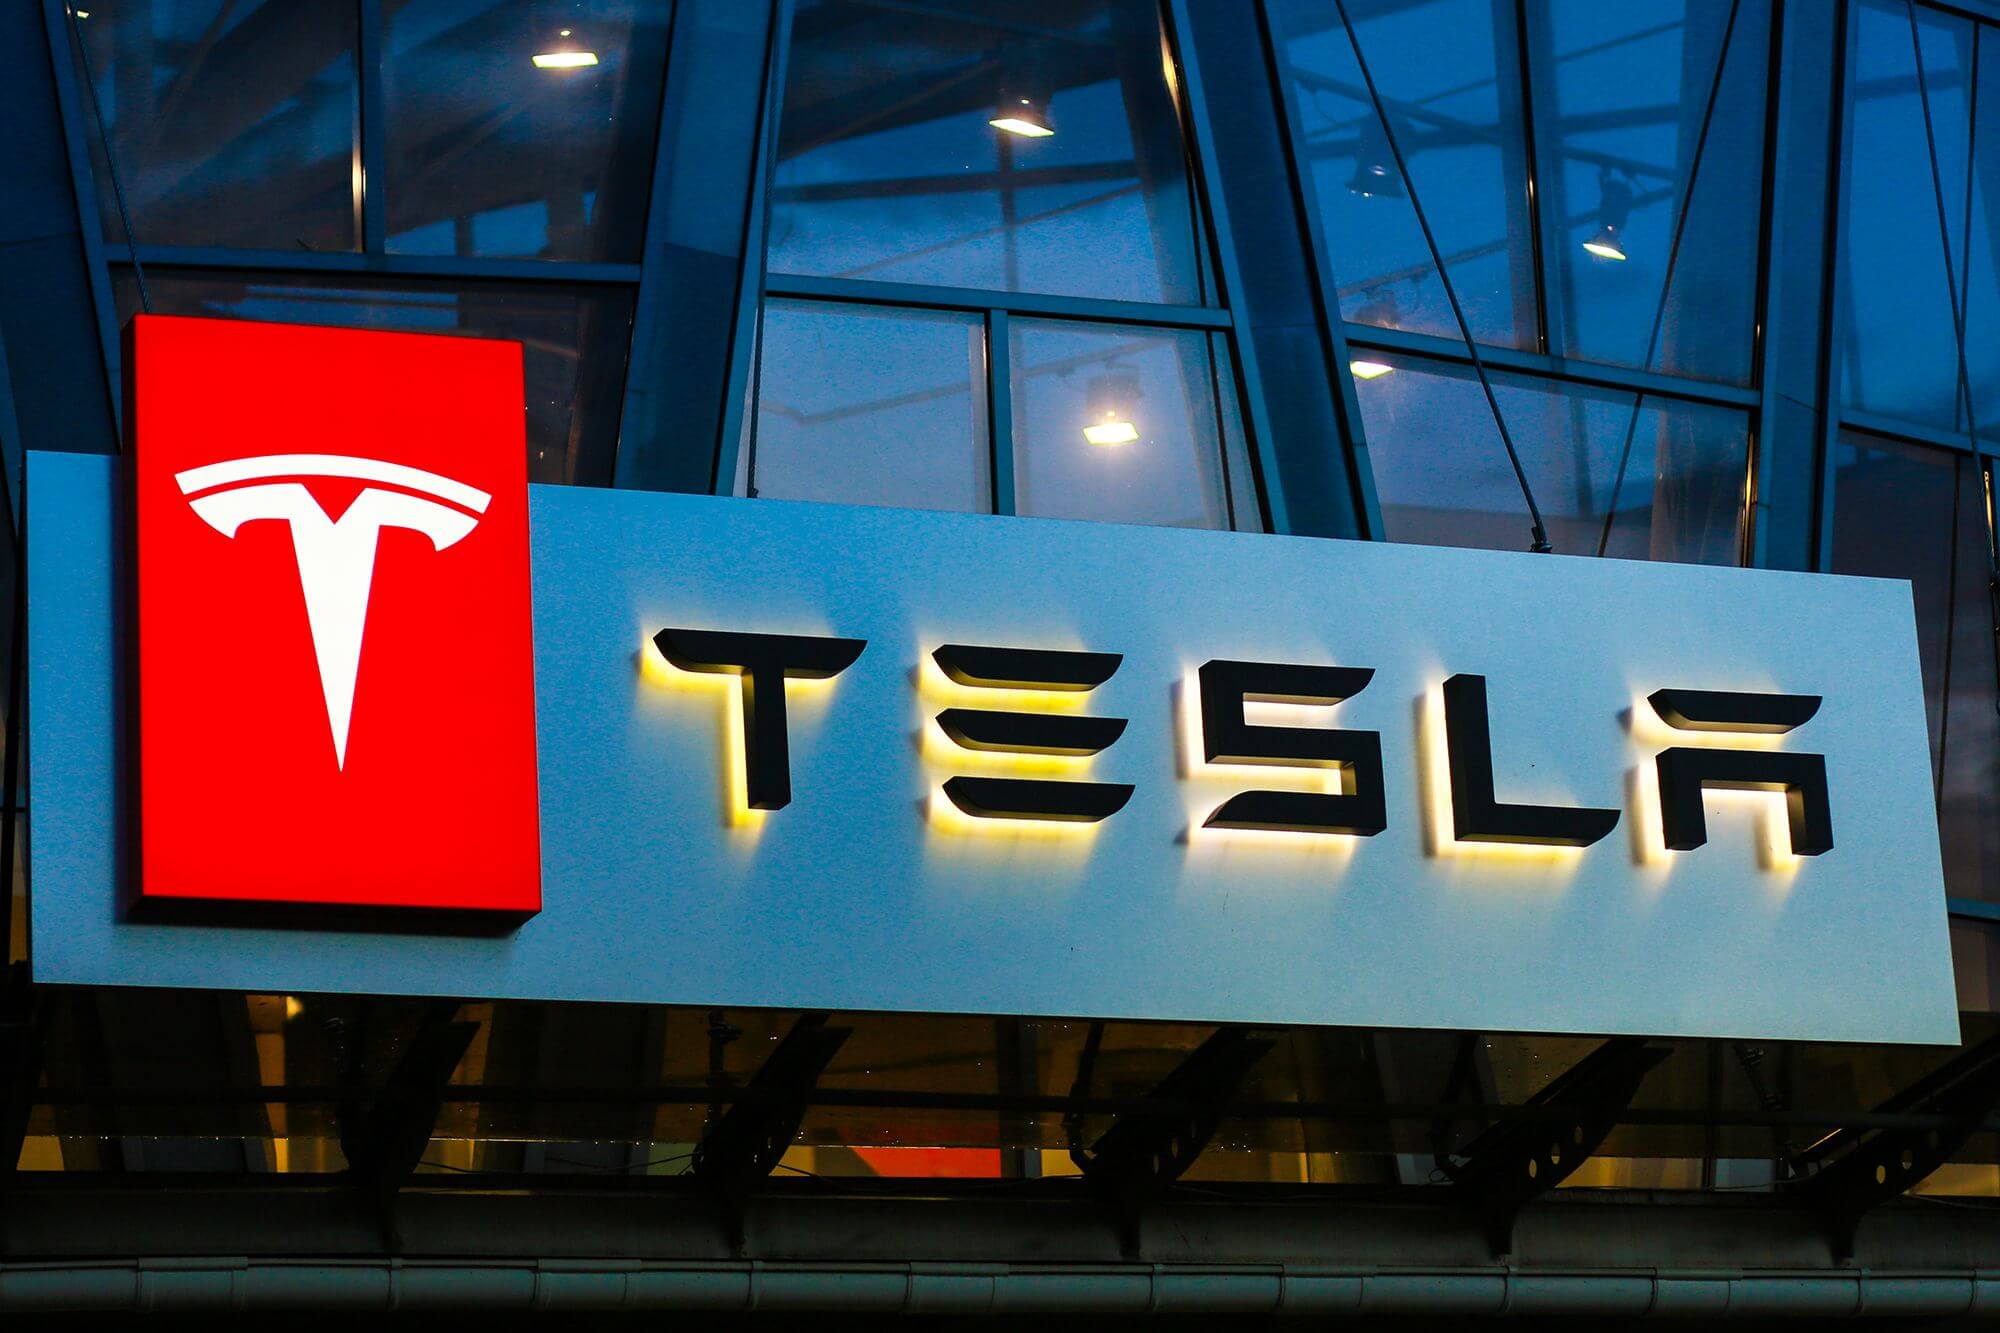 Tesla launched new social media platforms for public relations